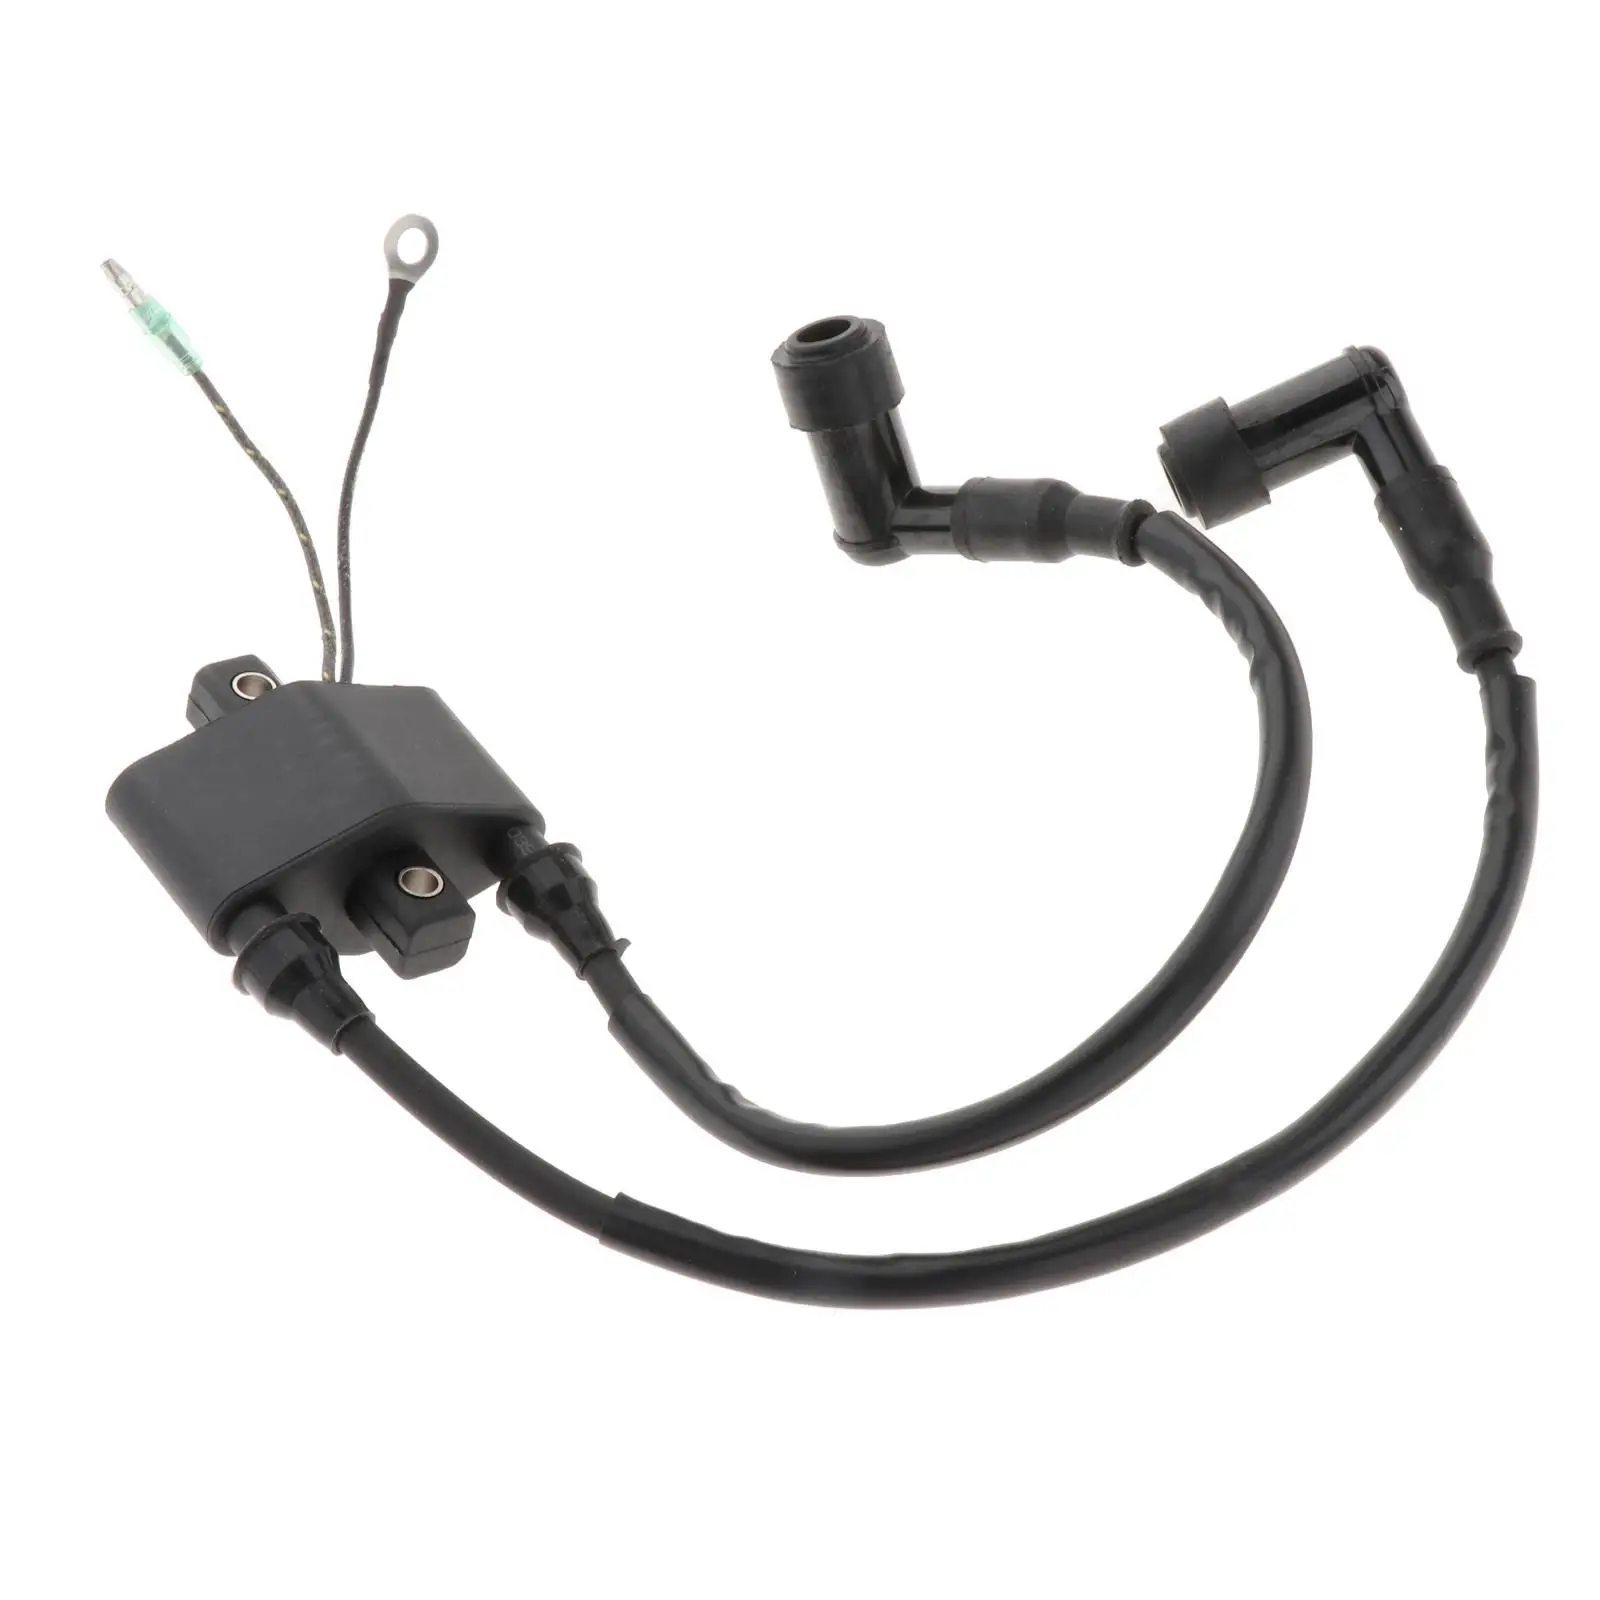 Ignition Coil Parts 3G2-06040-4 803706A1 3G2-06040 3G2060404 Fit for Tohatsu 9.9 15 18HP 2 Stroke Boat Motor Outboard